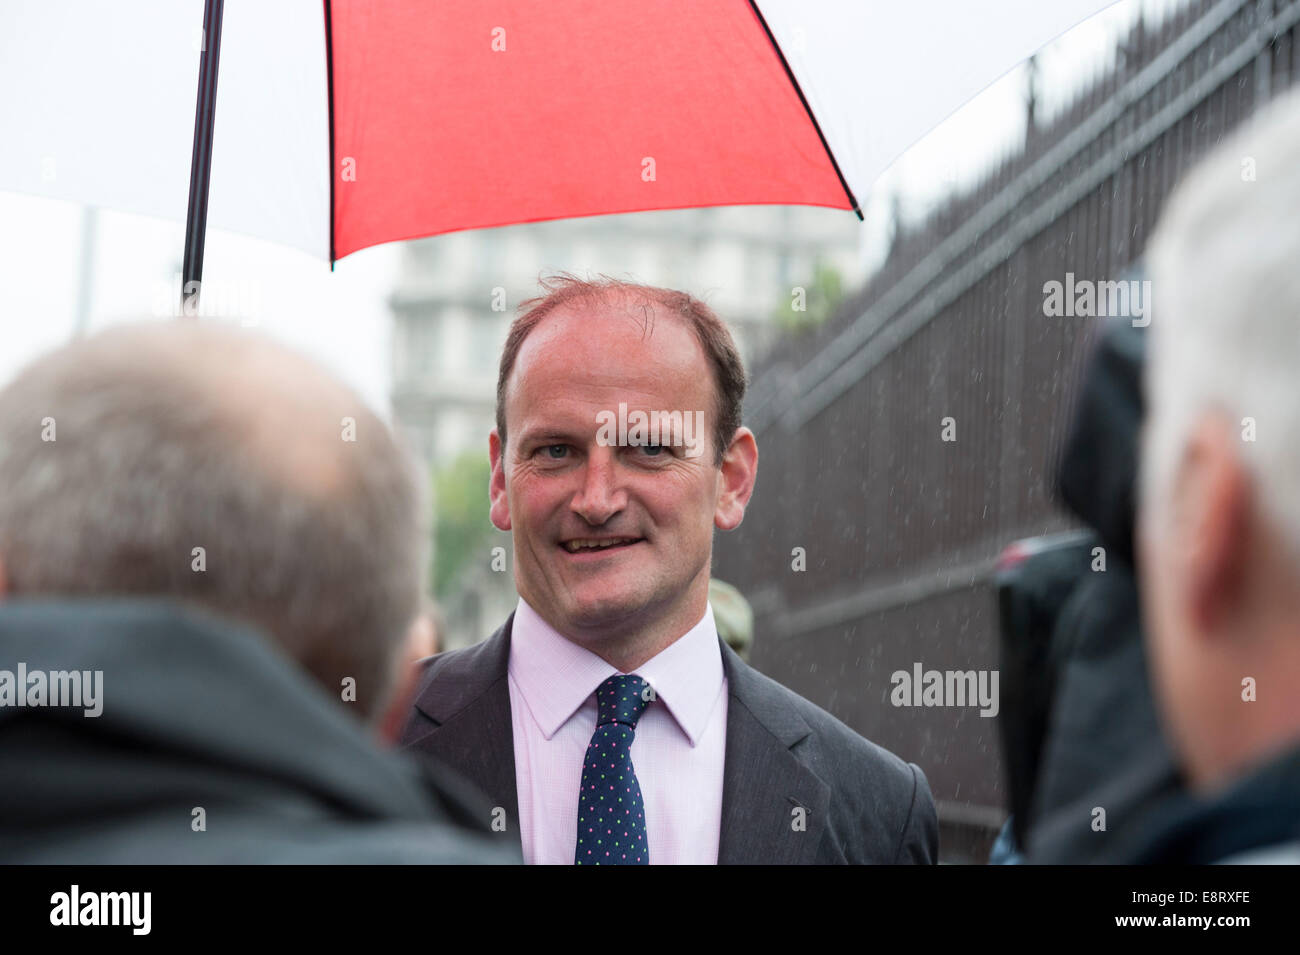 Parliament Square, London, UK. 13th October 2014. Ukip MP Douglas Carswell arrives at the Houses of Parliament. Stock Photo